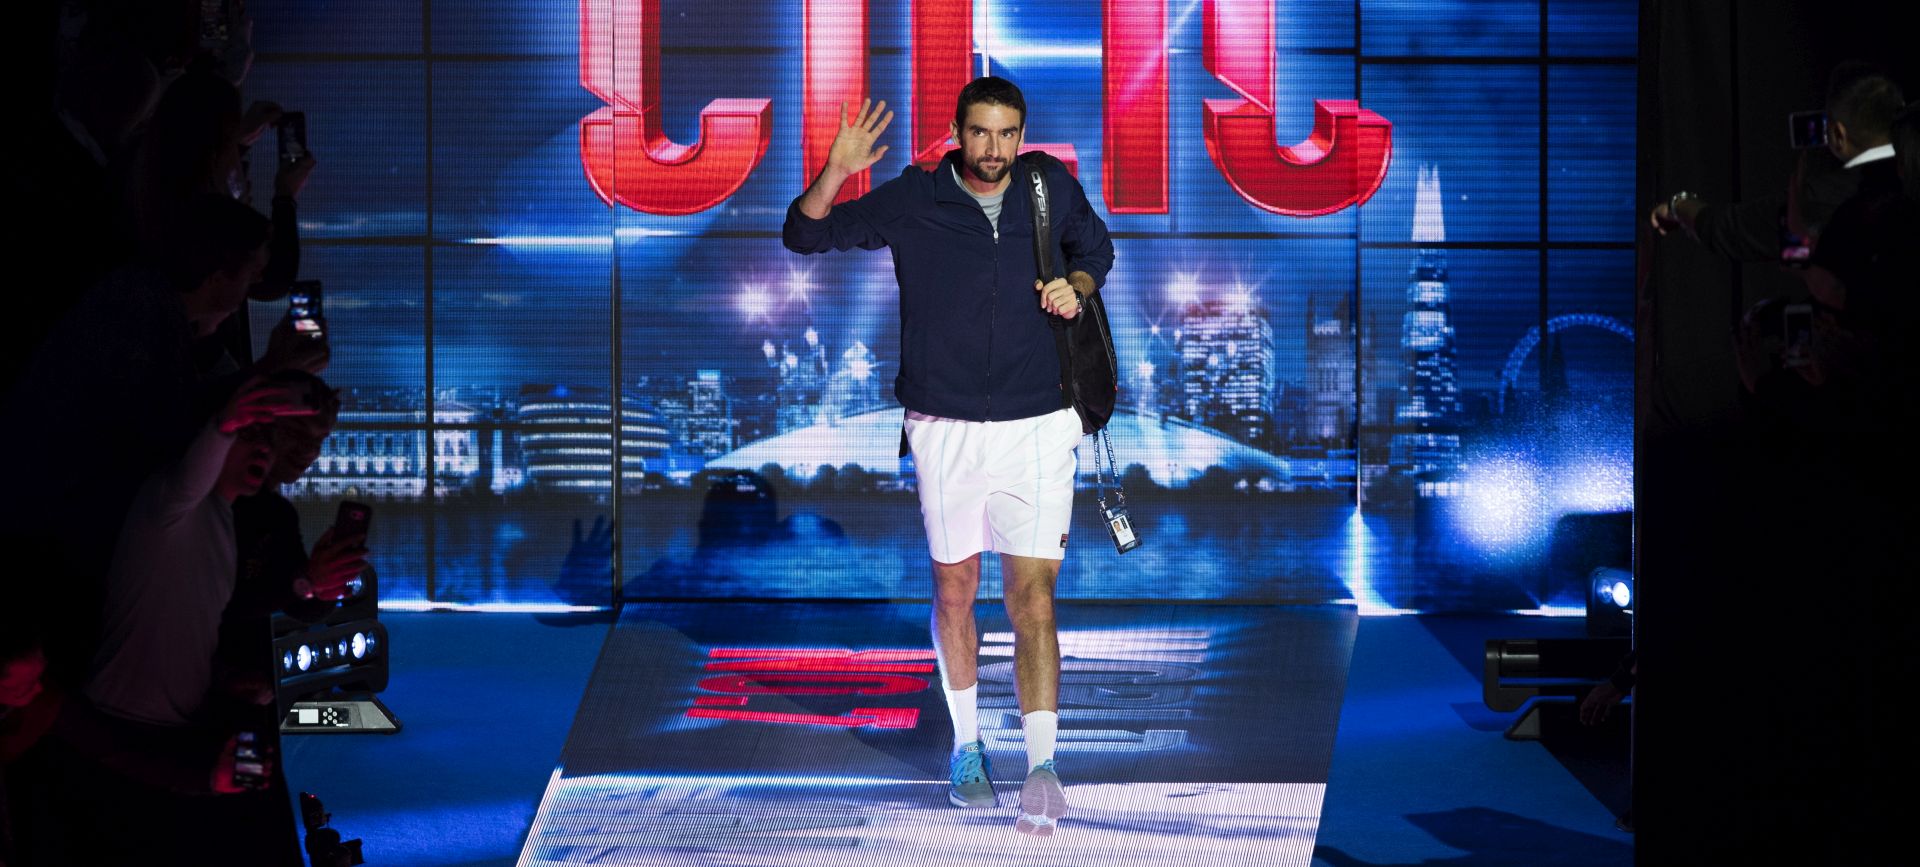 epa07171445 Croatia's Marin Cilic arrives ahead of his round robin match against Serbia's Novak Djokovic on day six of the ATP World Tour Finals tennis tournament at the O2 Arena in London, Britain, 16 November 2018.  EPA/WILL OLIVER